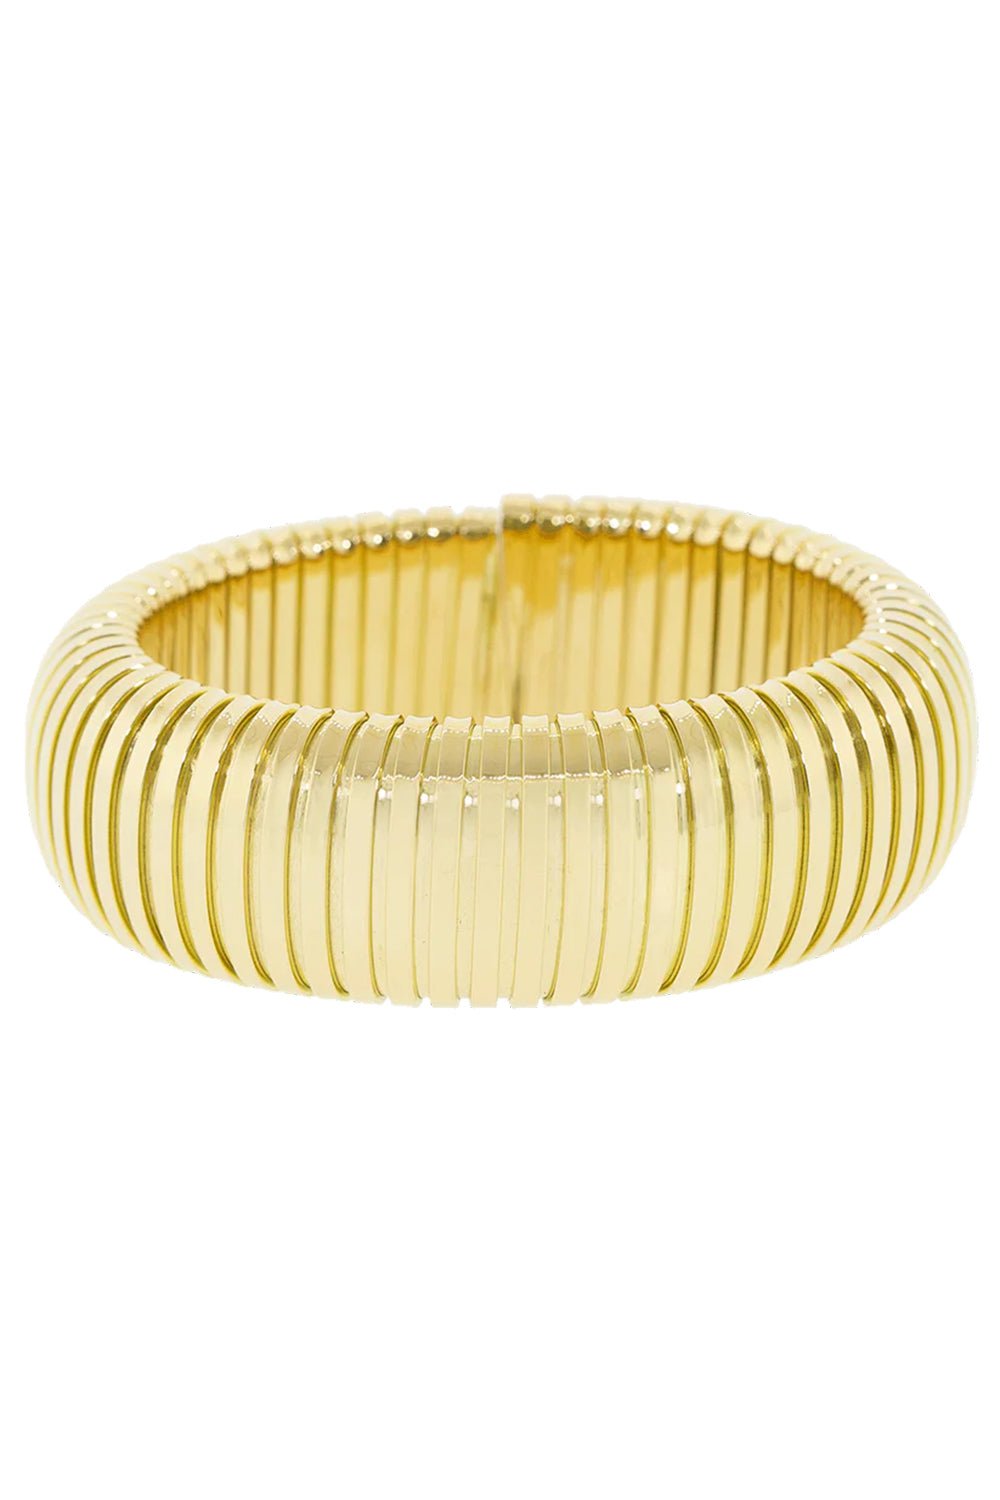 SIDNEY GARBER-Yellow Gold Domed Cuff Bracelet-YELLOW GOLD